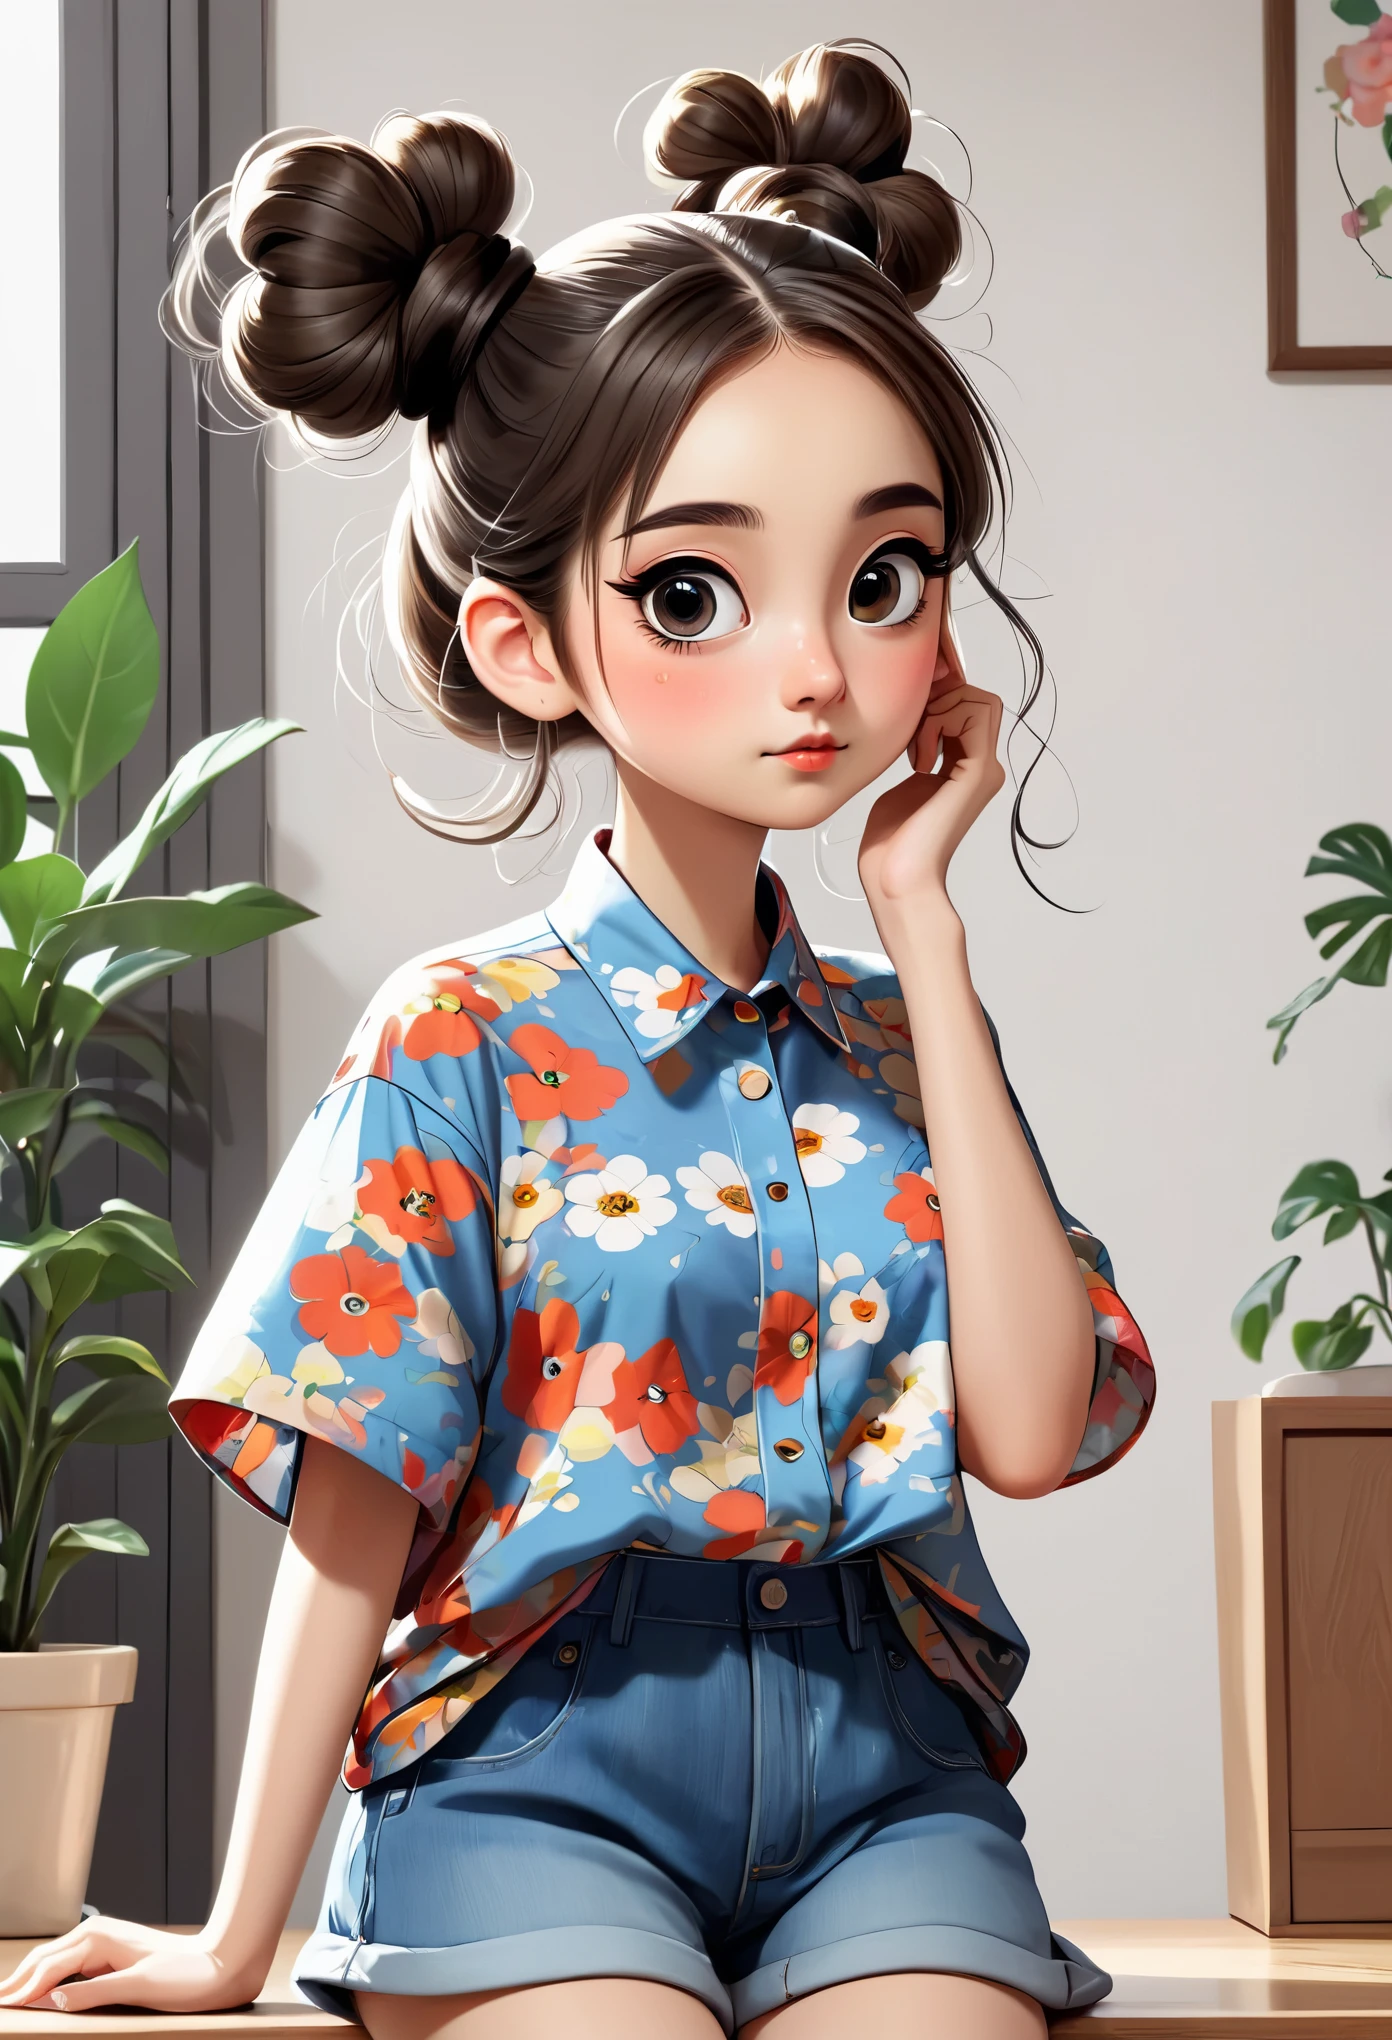 (masterpiece, best quality:1.2), cartoonish character design。1 girl, alone，big eyes，Cute expression，Two hair buns，Floral shirt，work clothes，white sneakers，stand，interesting，interesting，Clean lines